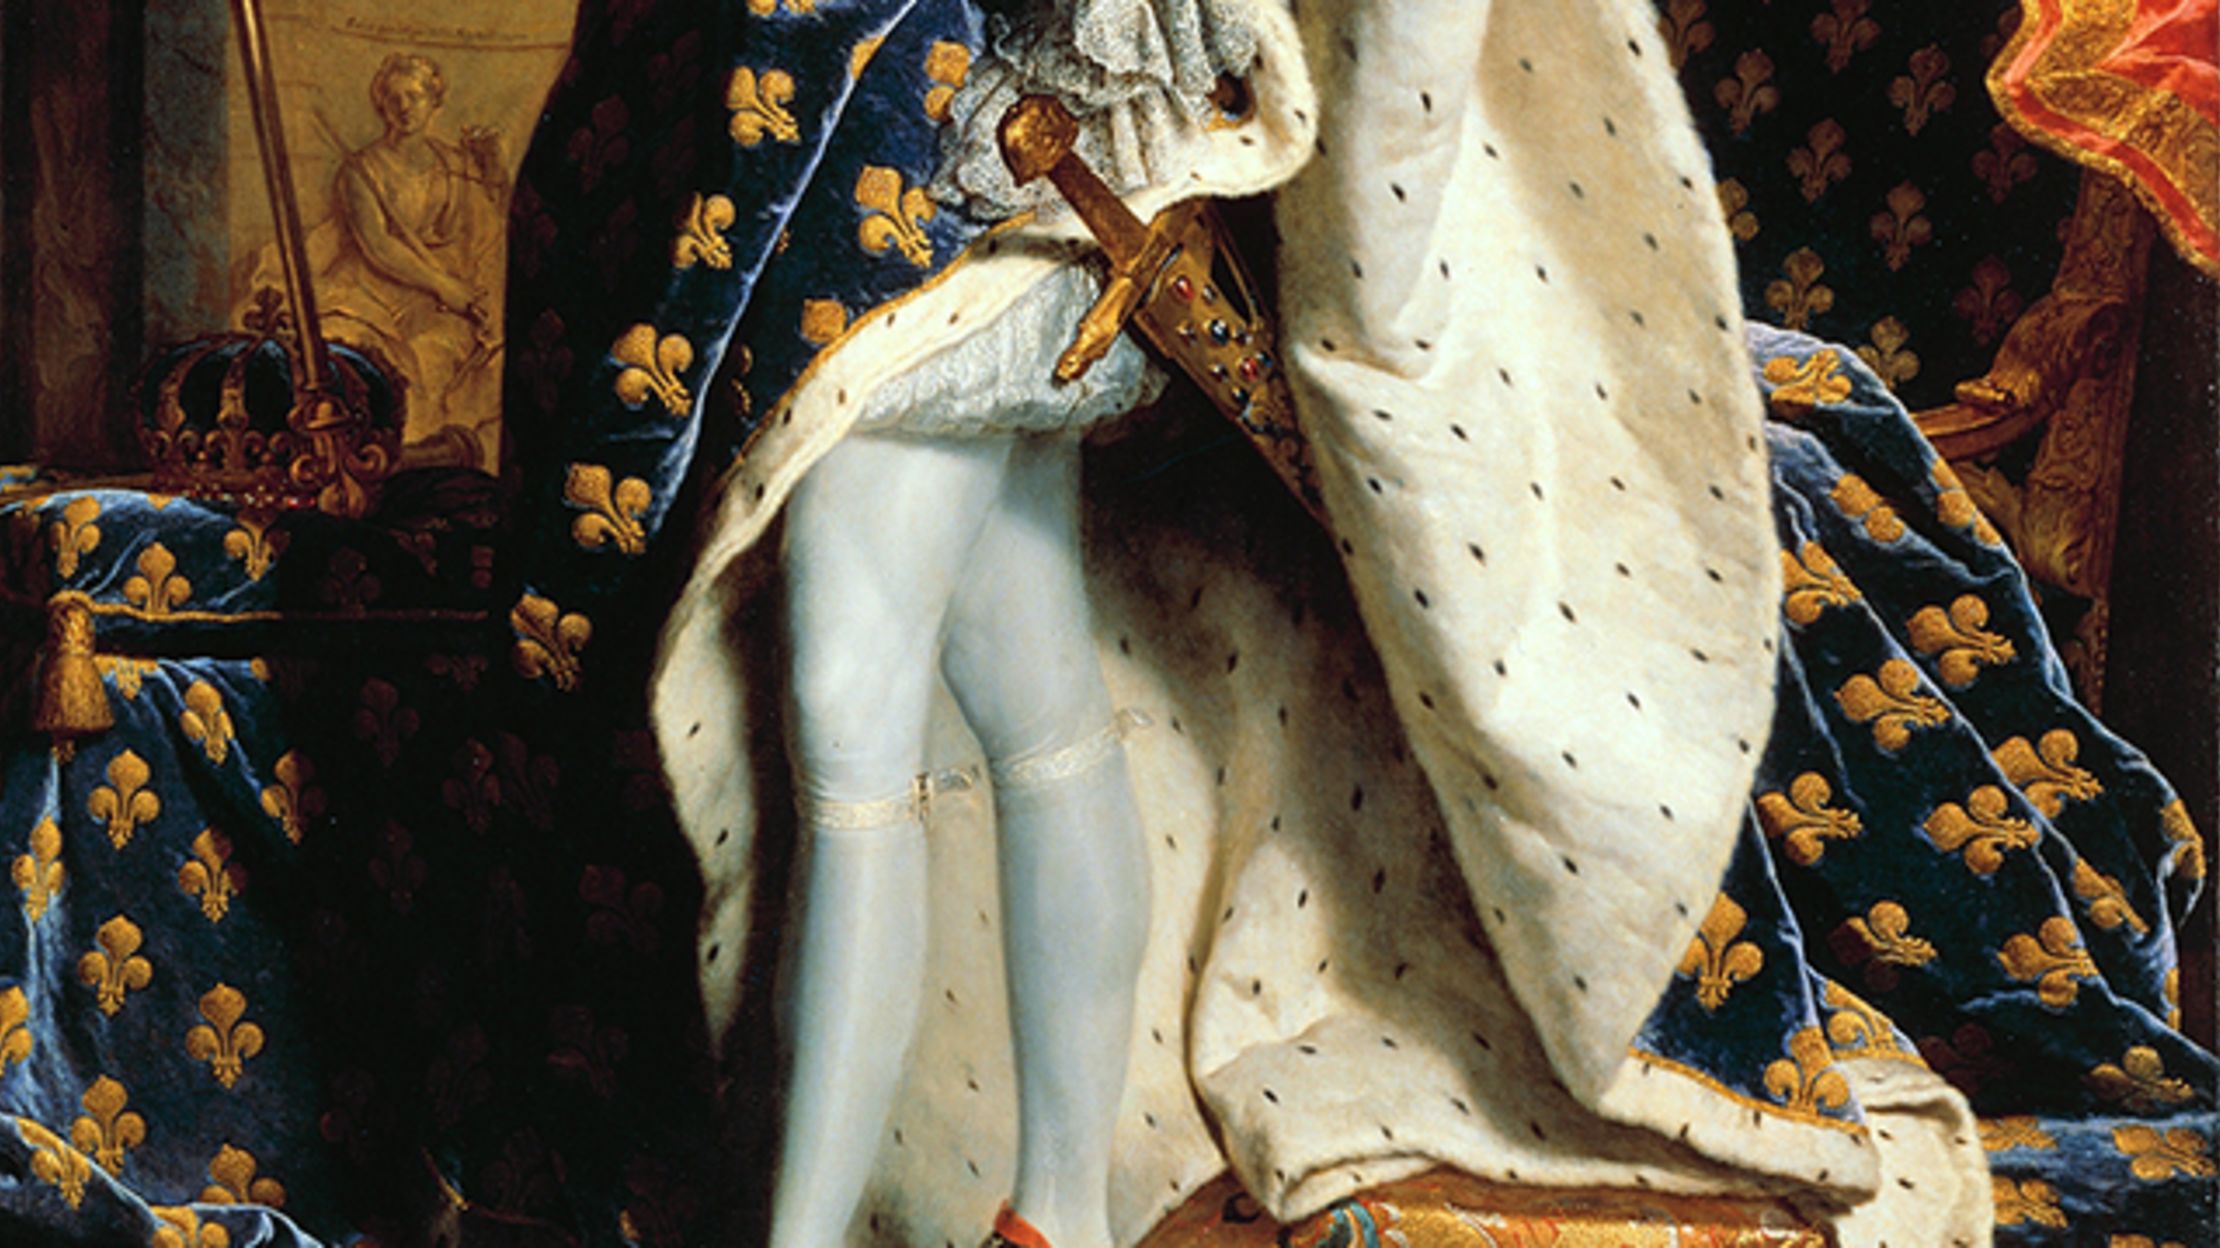 The Art of Power: How Louis XIV Ruled France ... With Ballet | Mental Floss